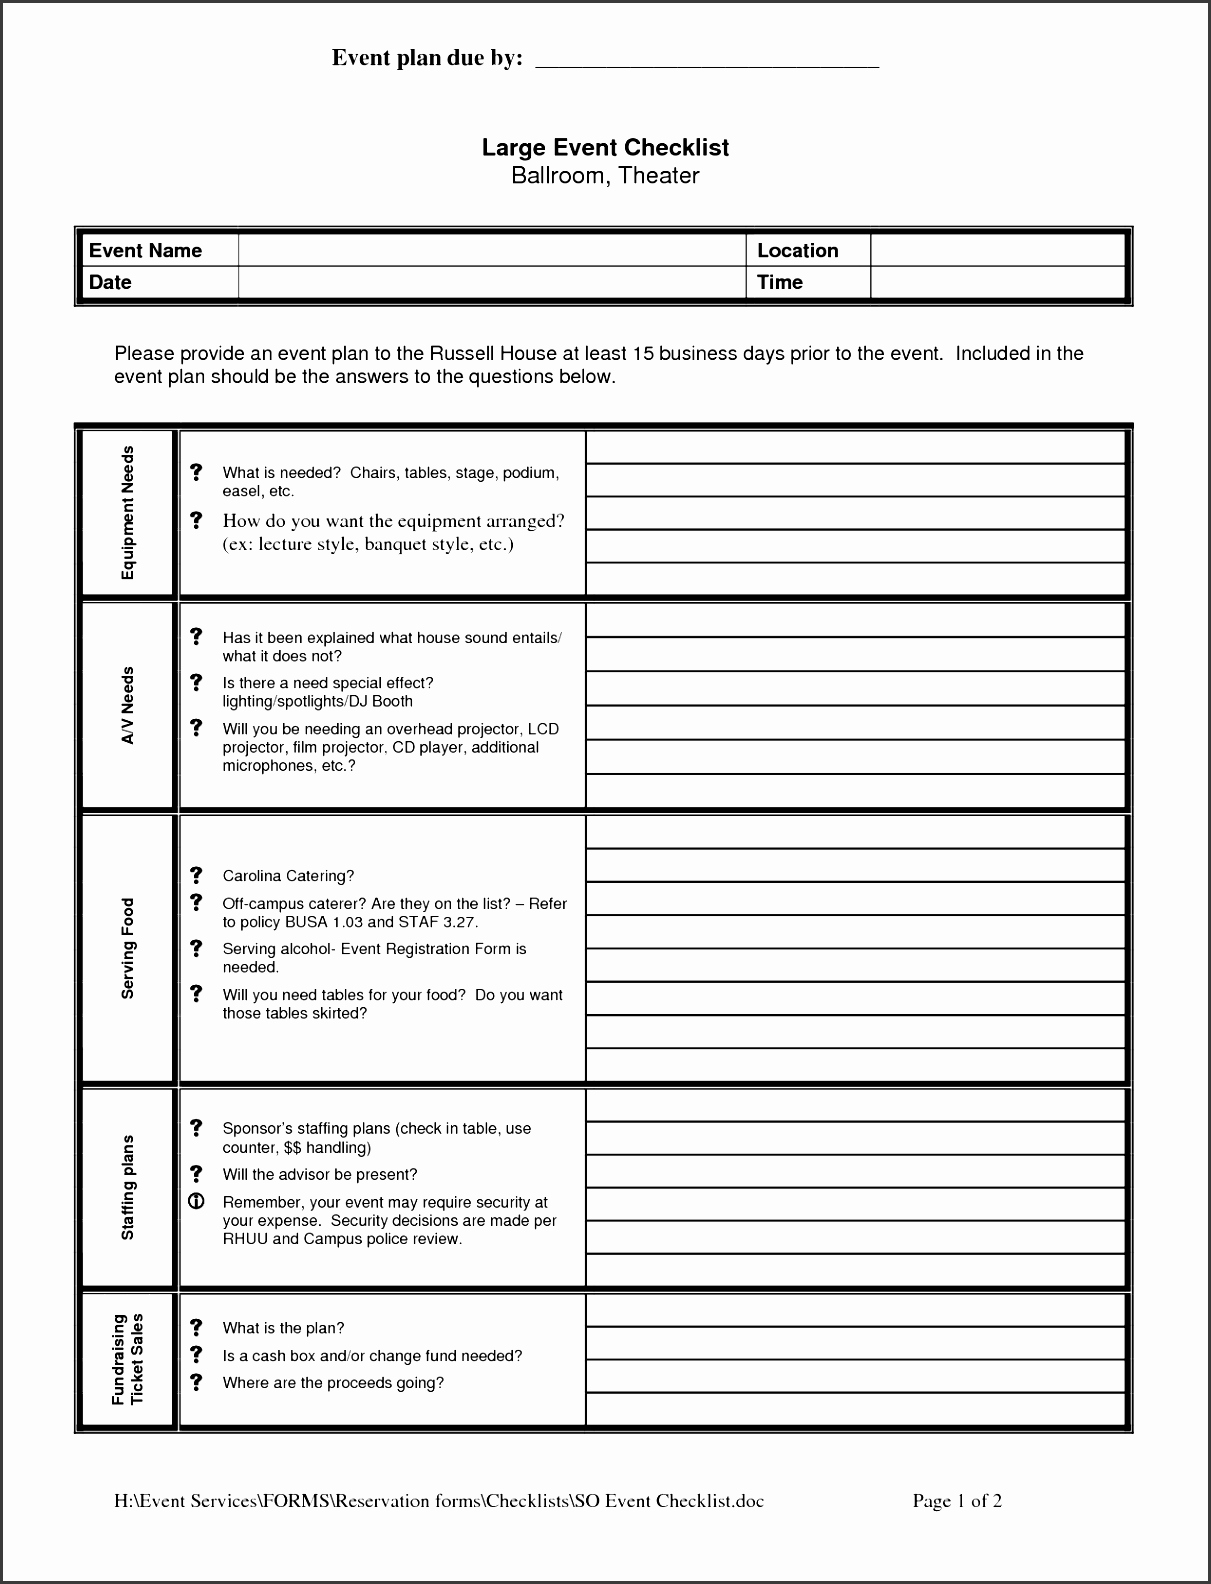 Meeting Planner Checklist Template Awesome 9 Career Planning Checklist Layout Sampletemplatess